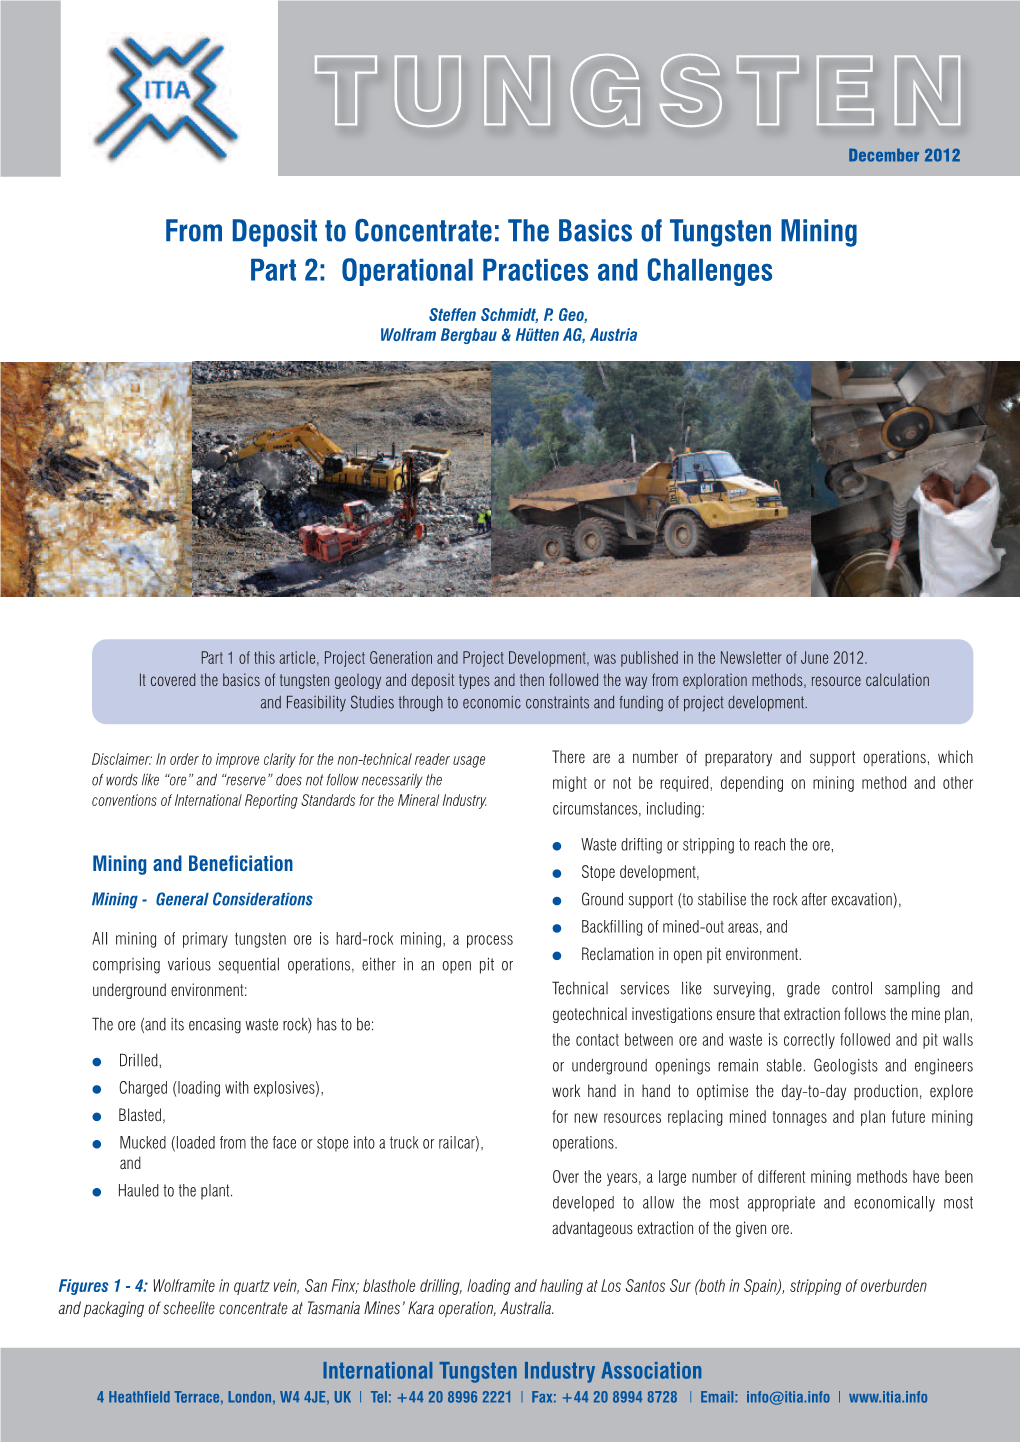 From Deposit to Concentrate: the Basics of Tungsten Mining Part 2: Operational Practices and Challenges